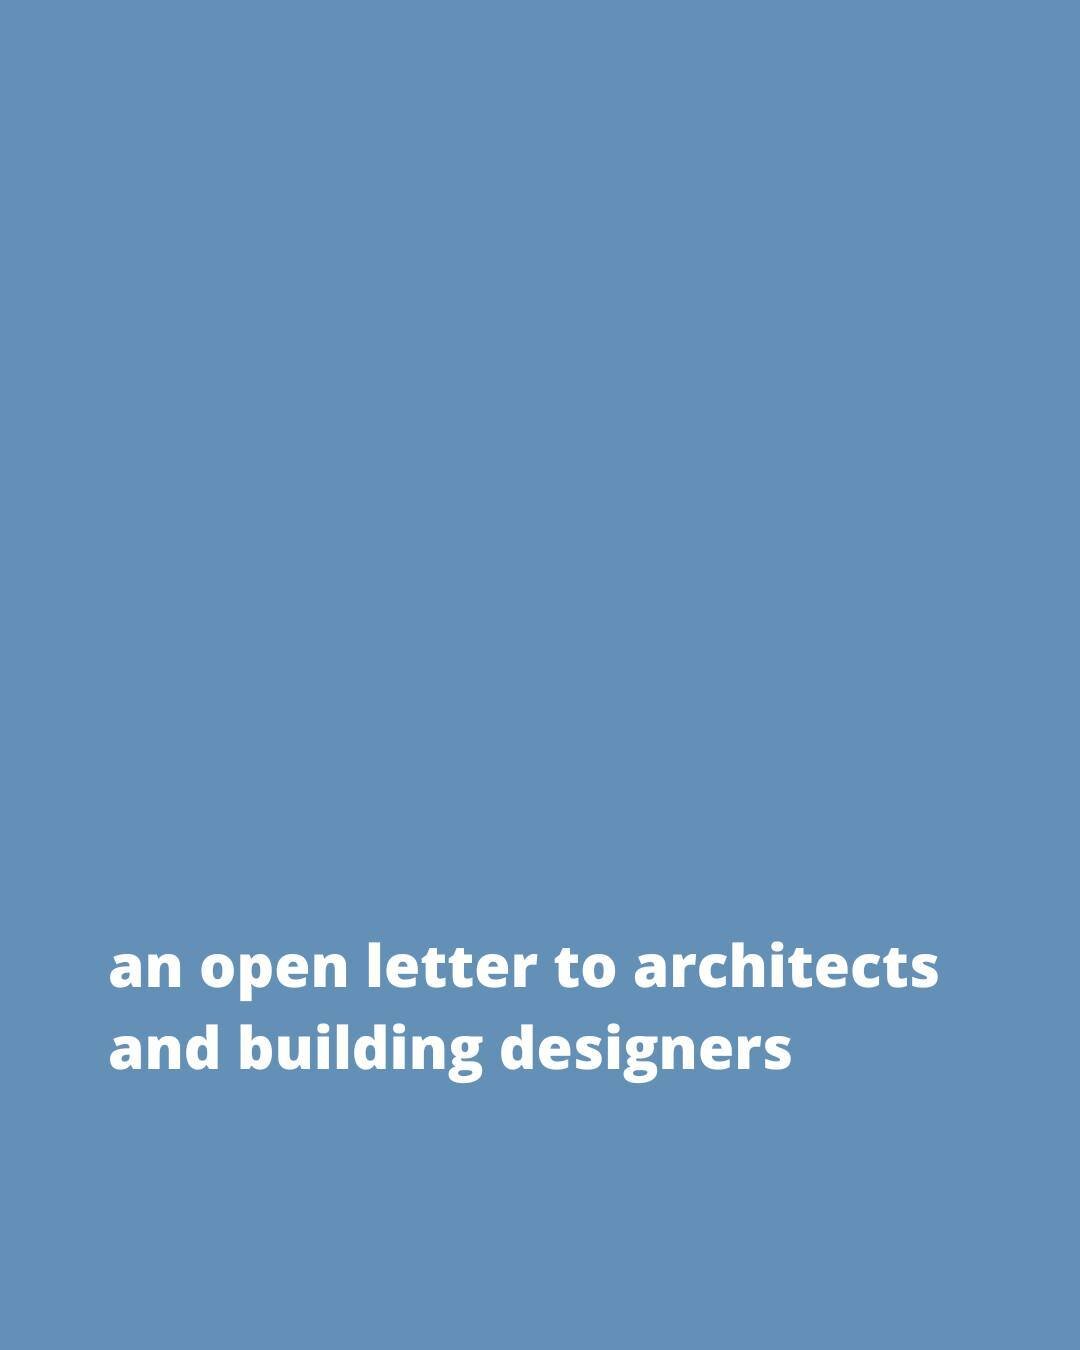 An open letter to architects and building designers.

Be better.